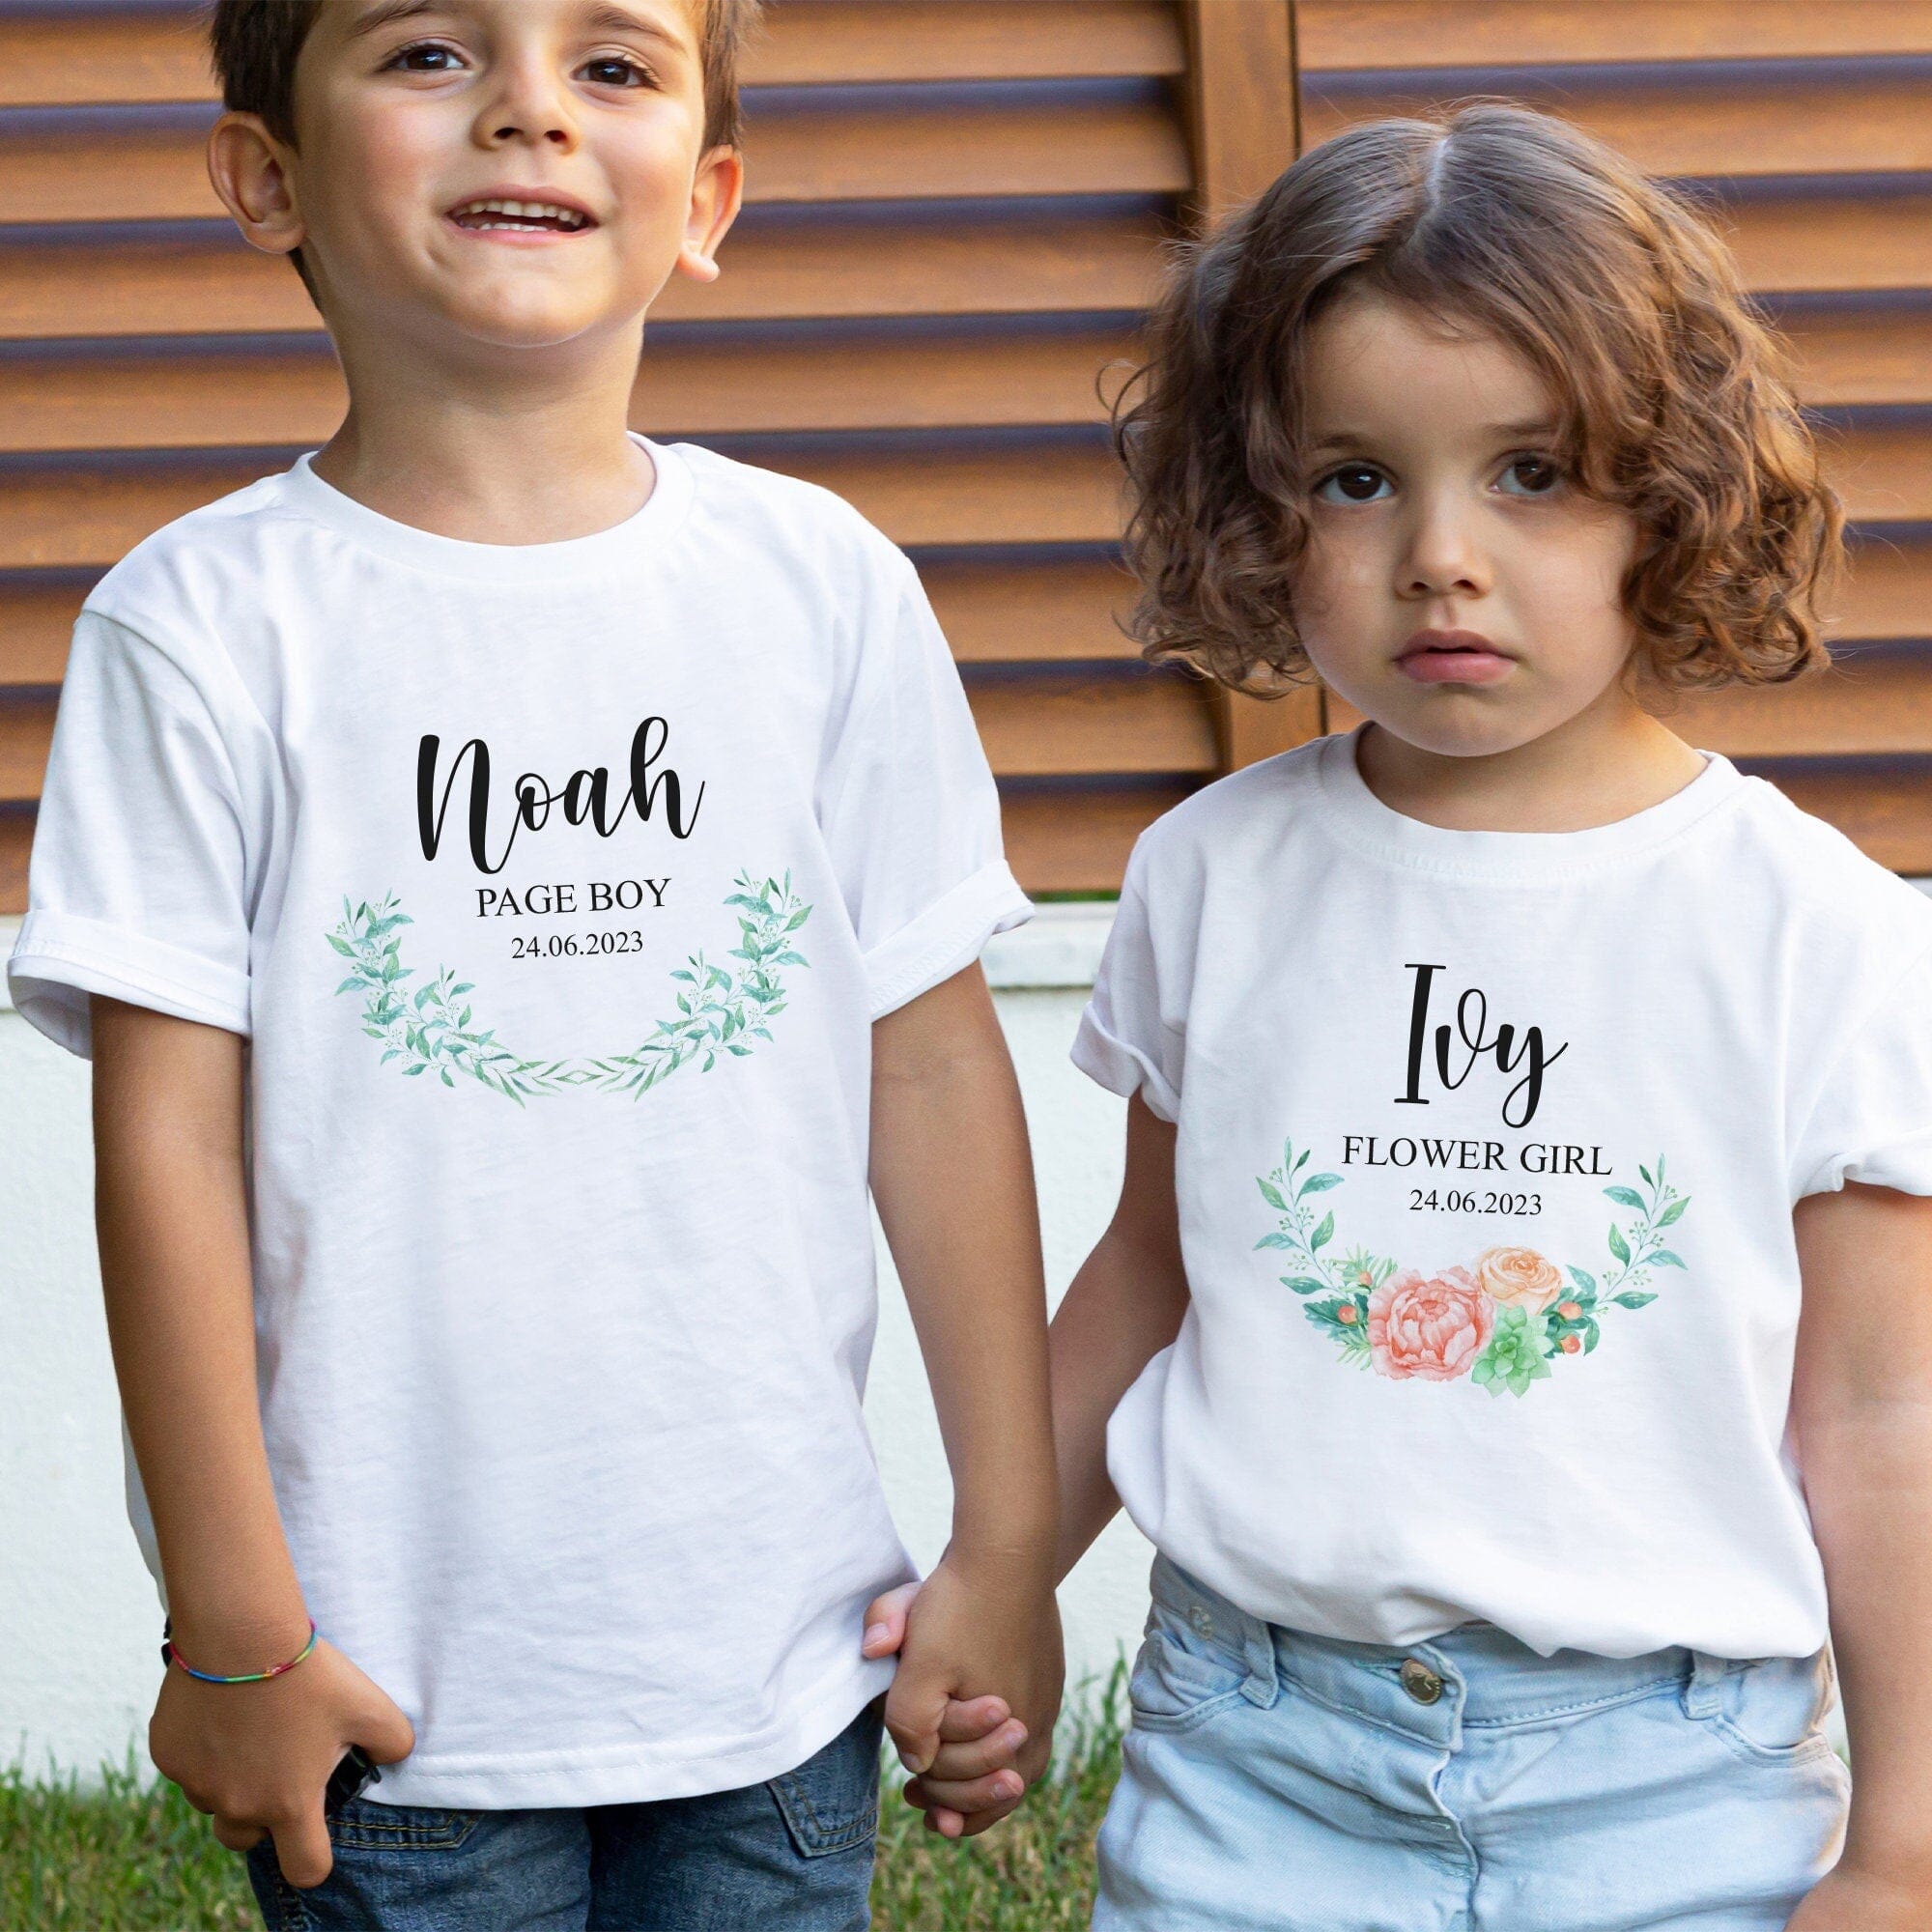 Flower Girl t-shirt, Wedding Proposal Gift for Kids, Bridal Party Wedding Day